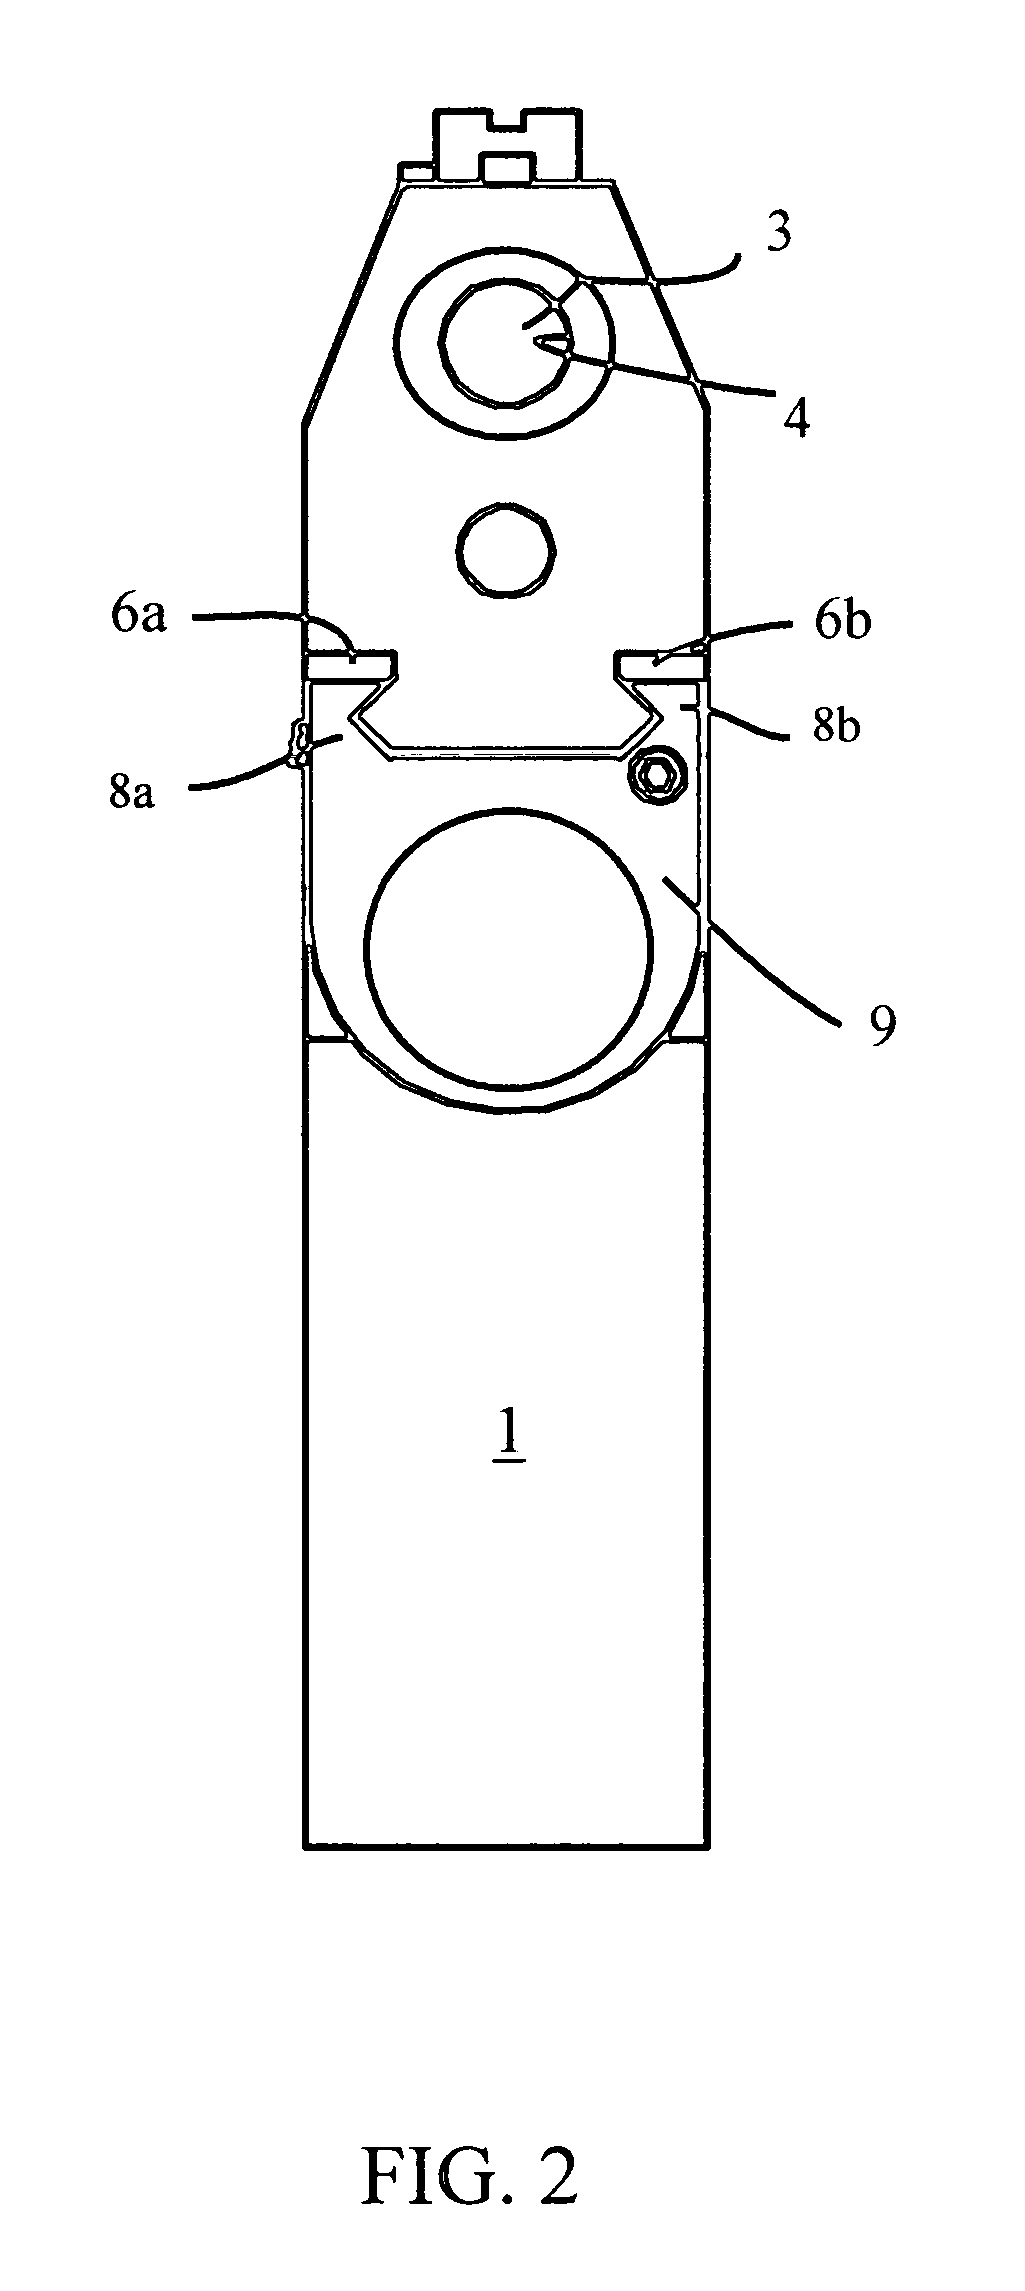 Attachment system used to mount accessory devices to a firearm